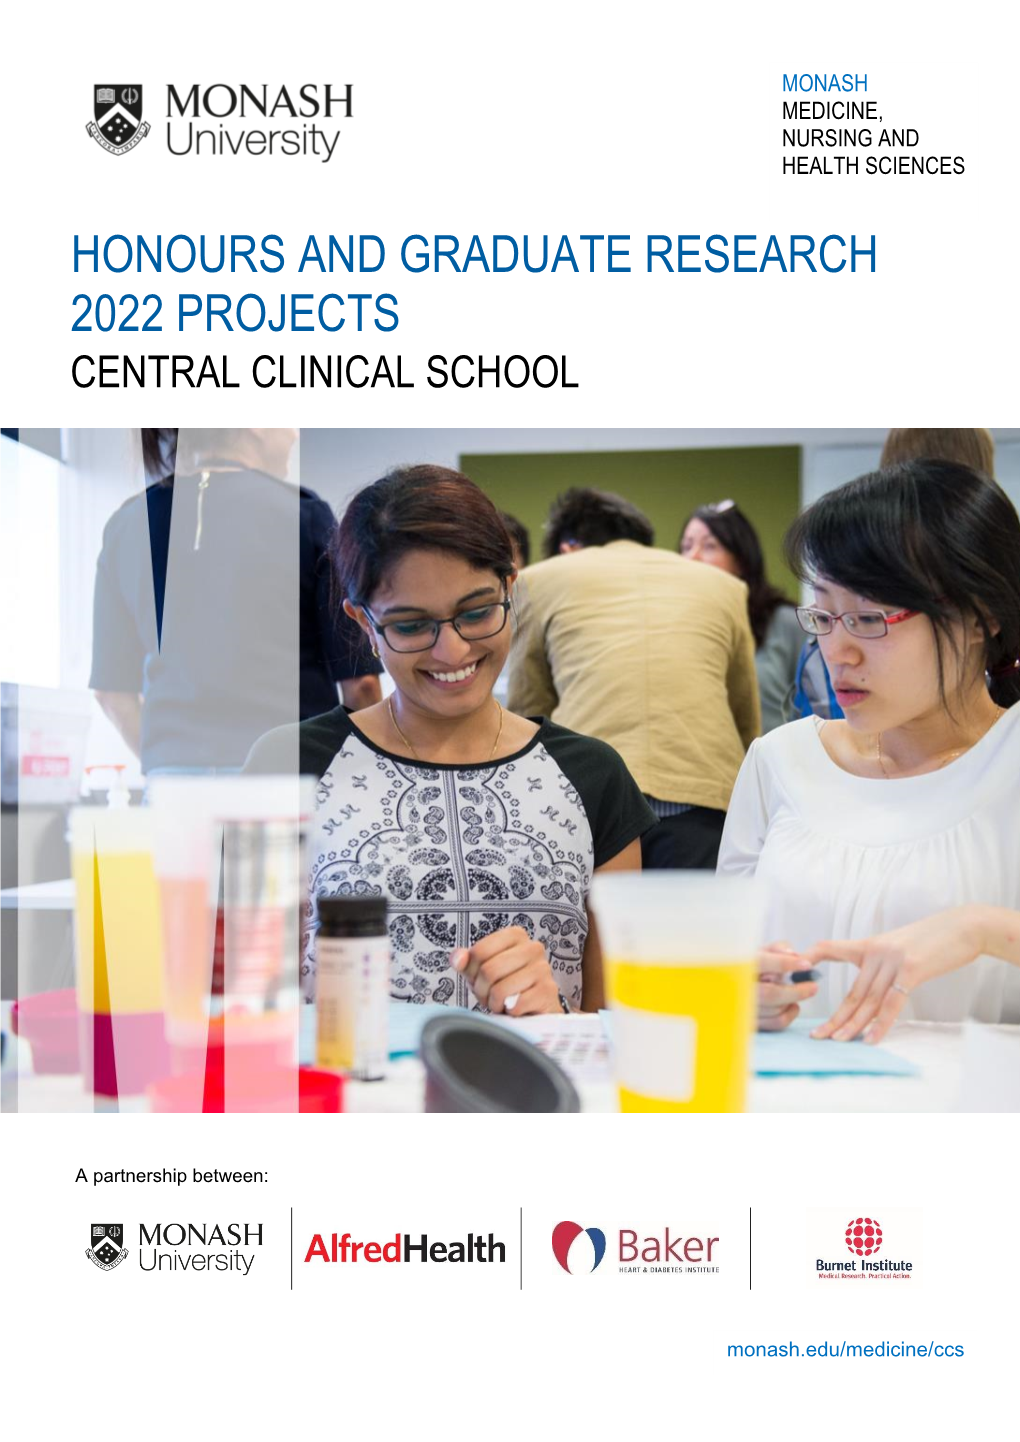 Honours and Graduate Research 2022 Projects Central Clinical School